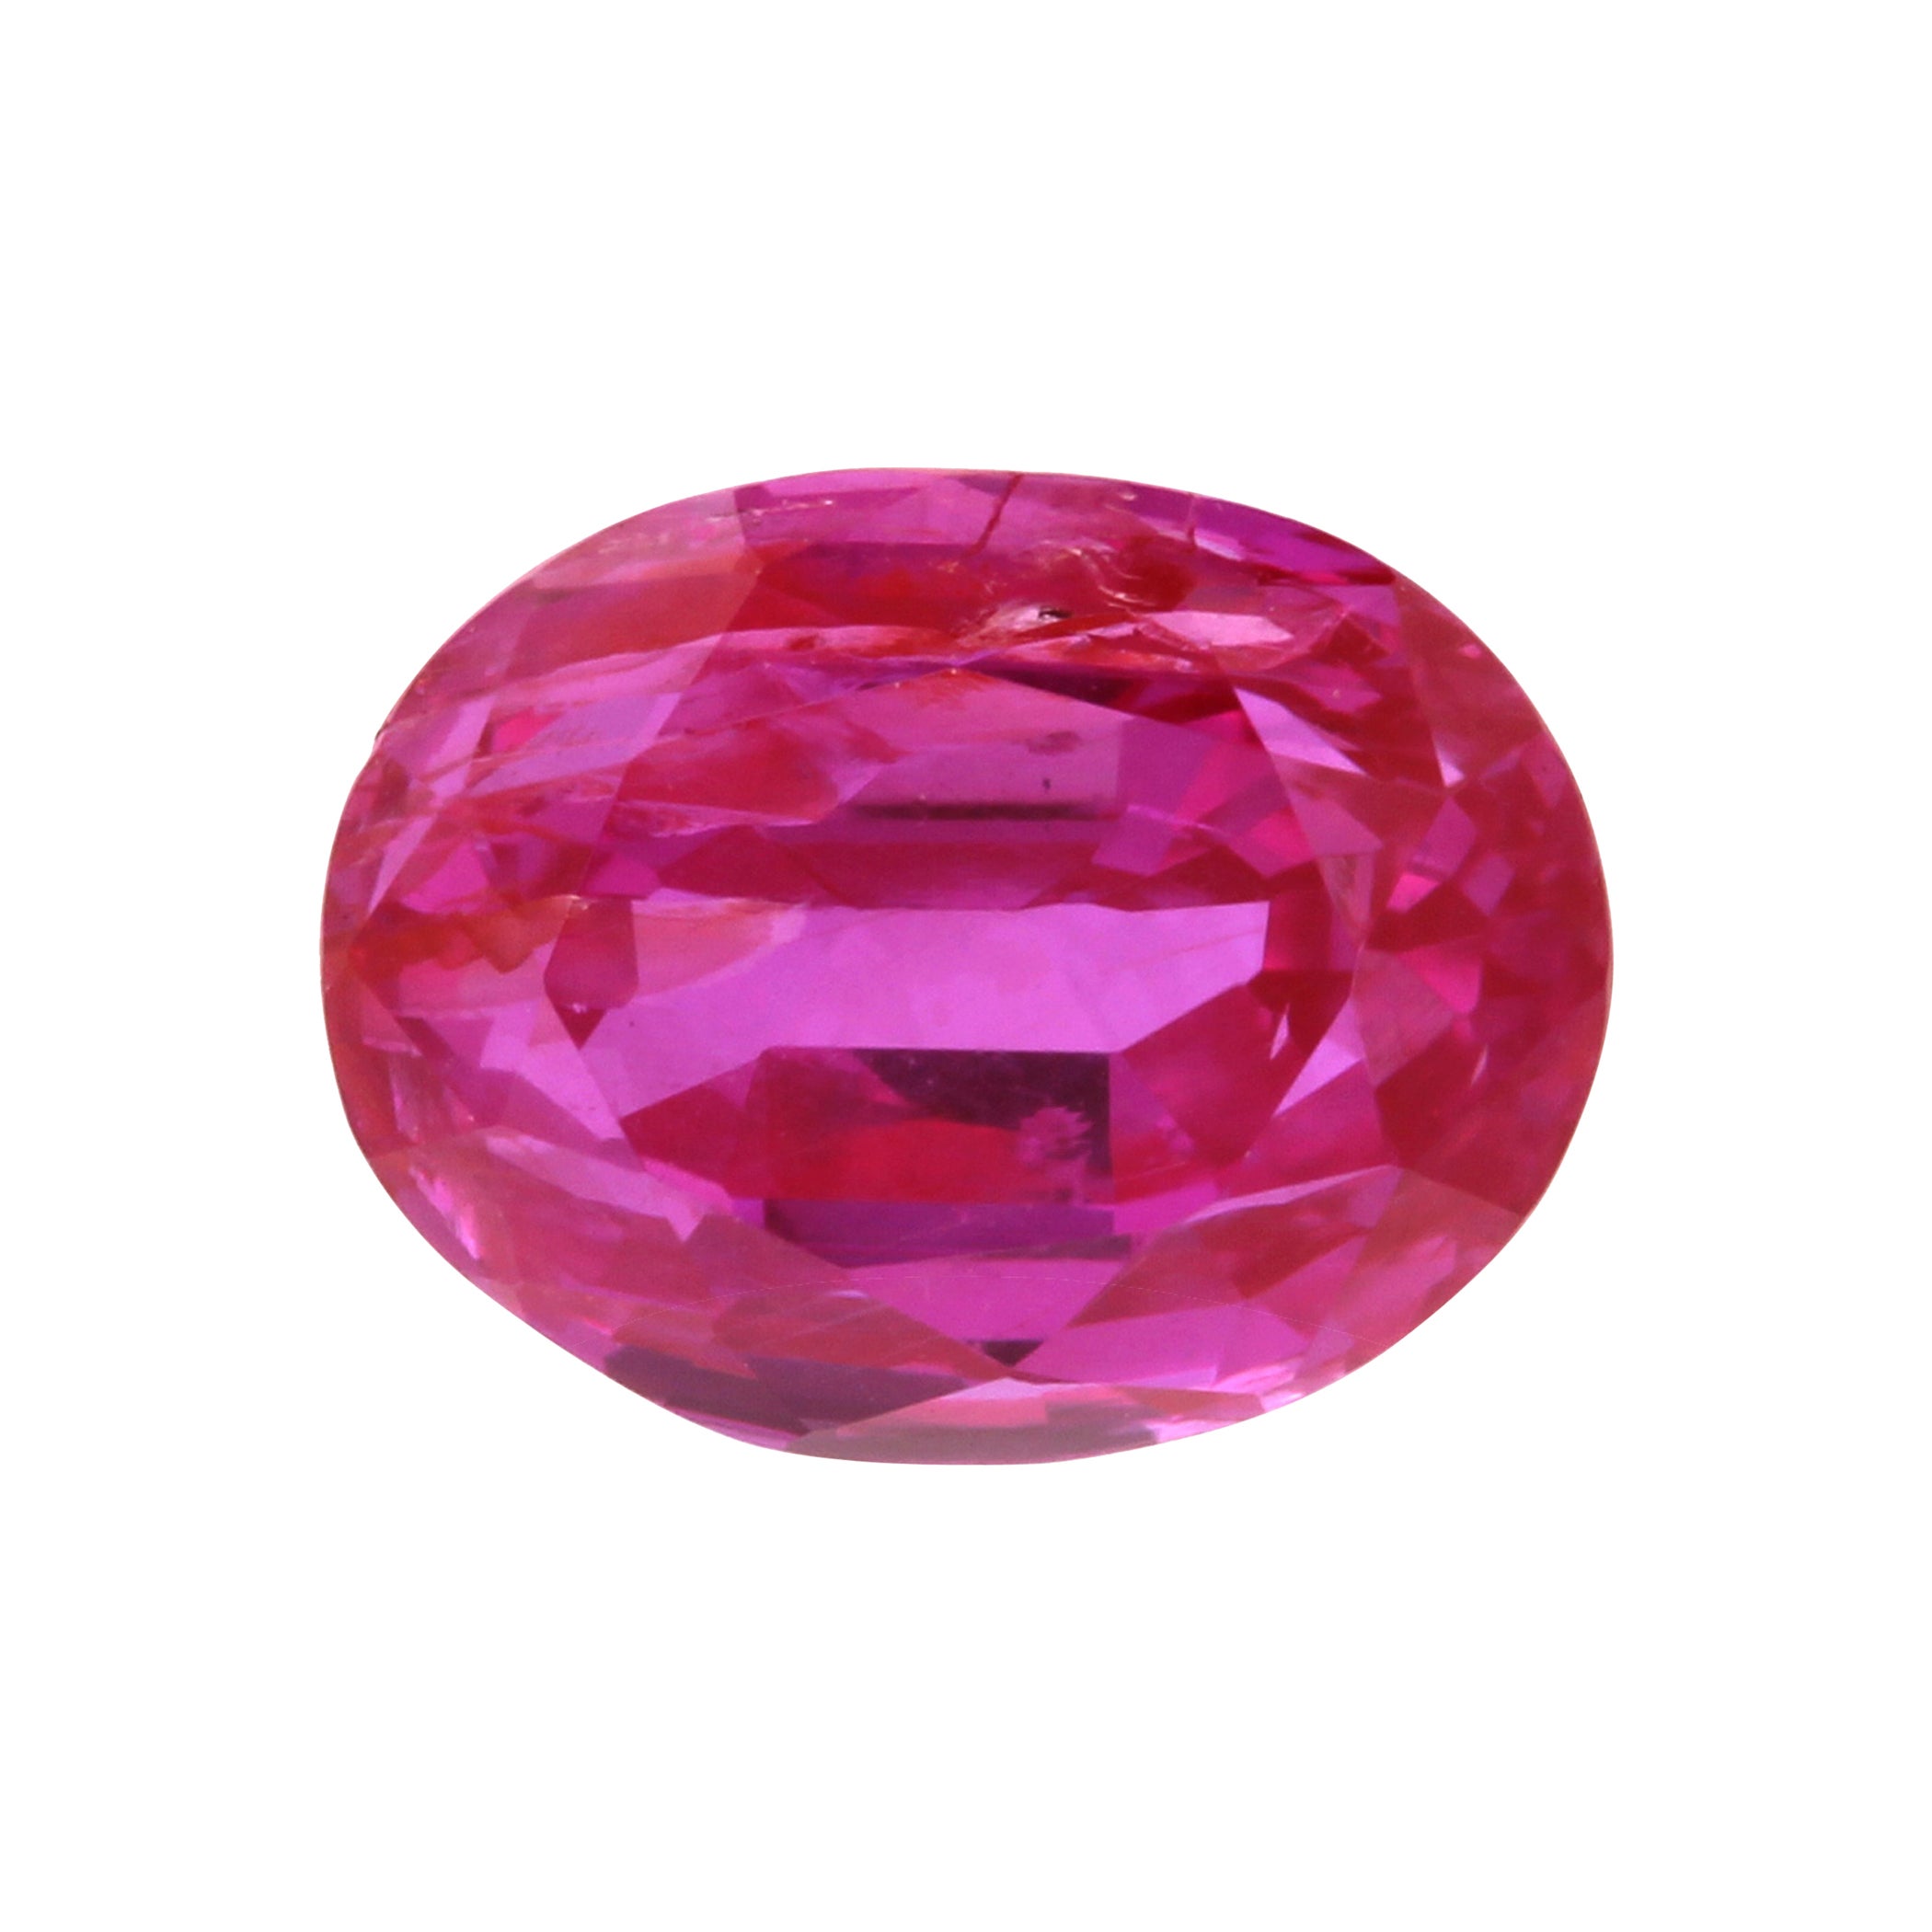 2.25 Carat Natural Unheated Burmese Oval Purple-Red Ruby GIA Certified